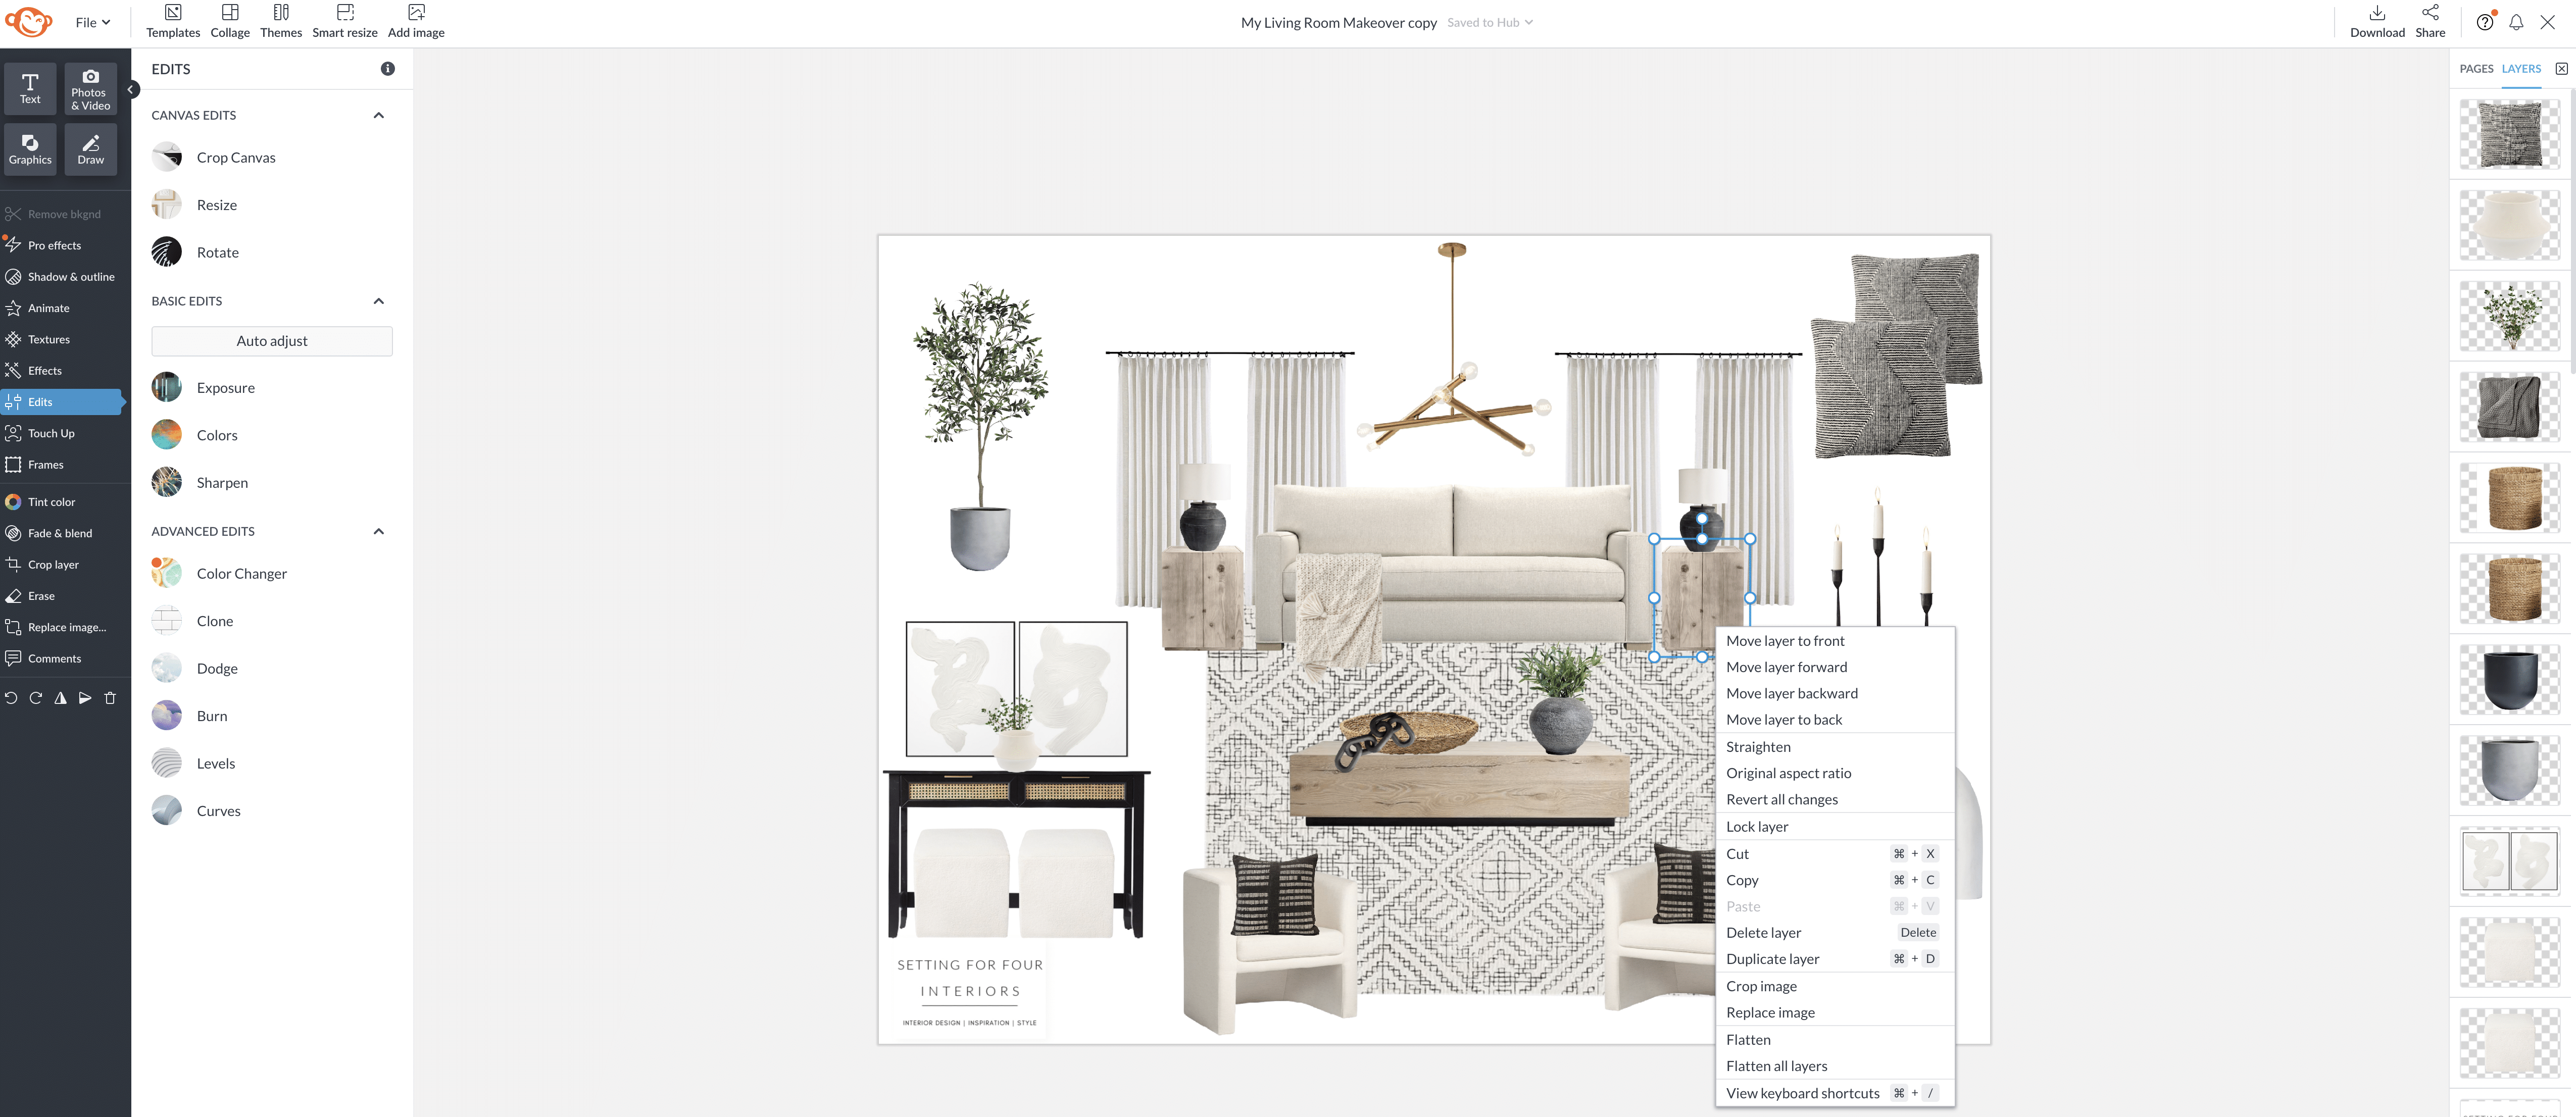 How to Make A Mood Board Collage For Interior Design